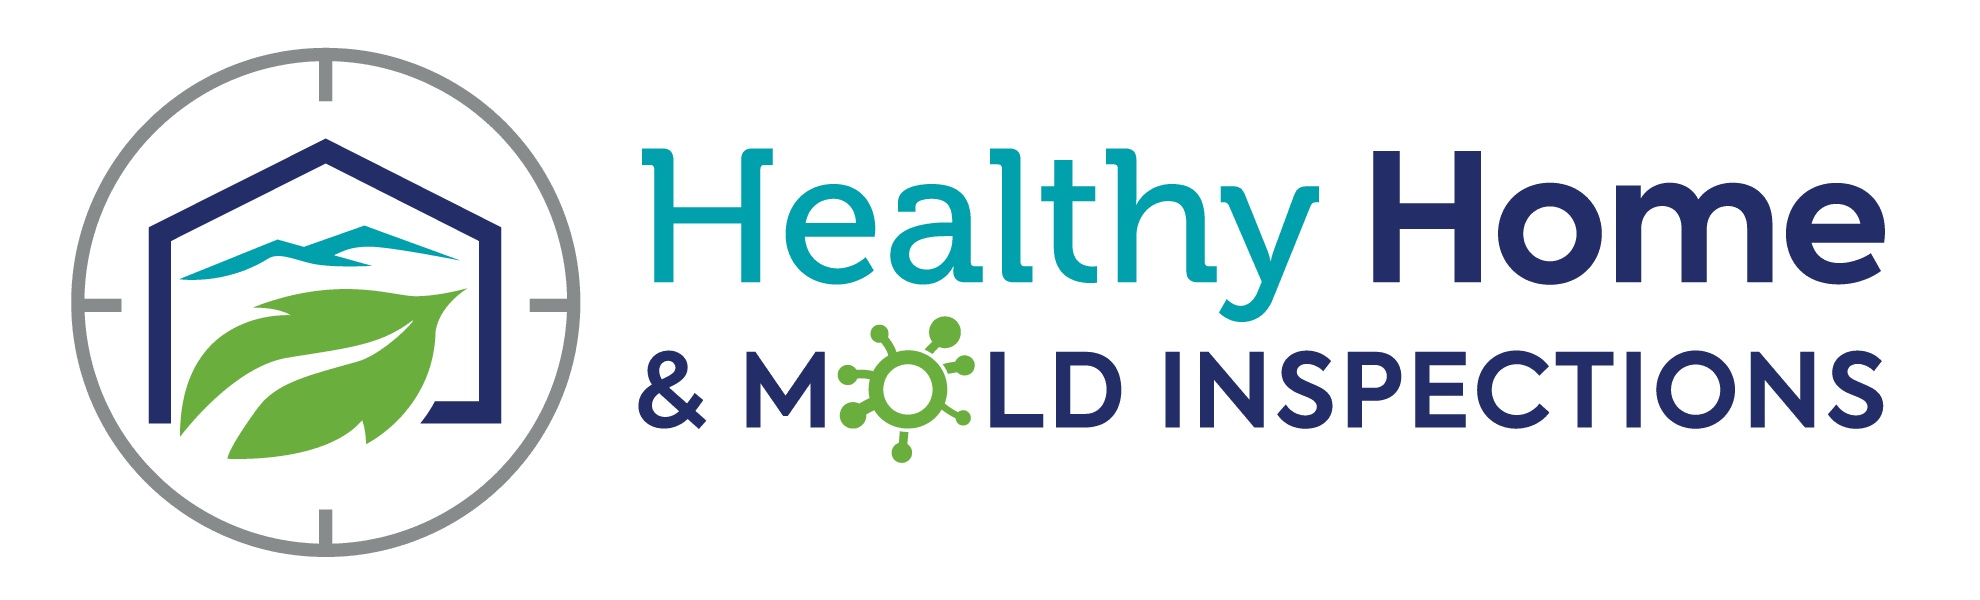 Healthy Home and Mold Inspections Logo